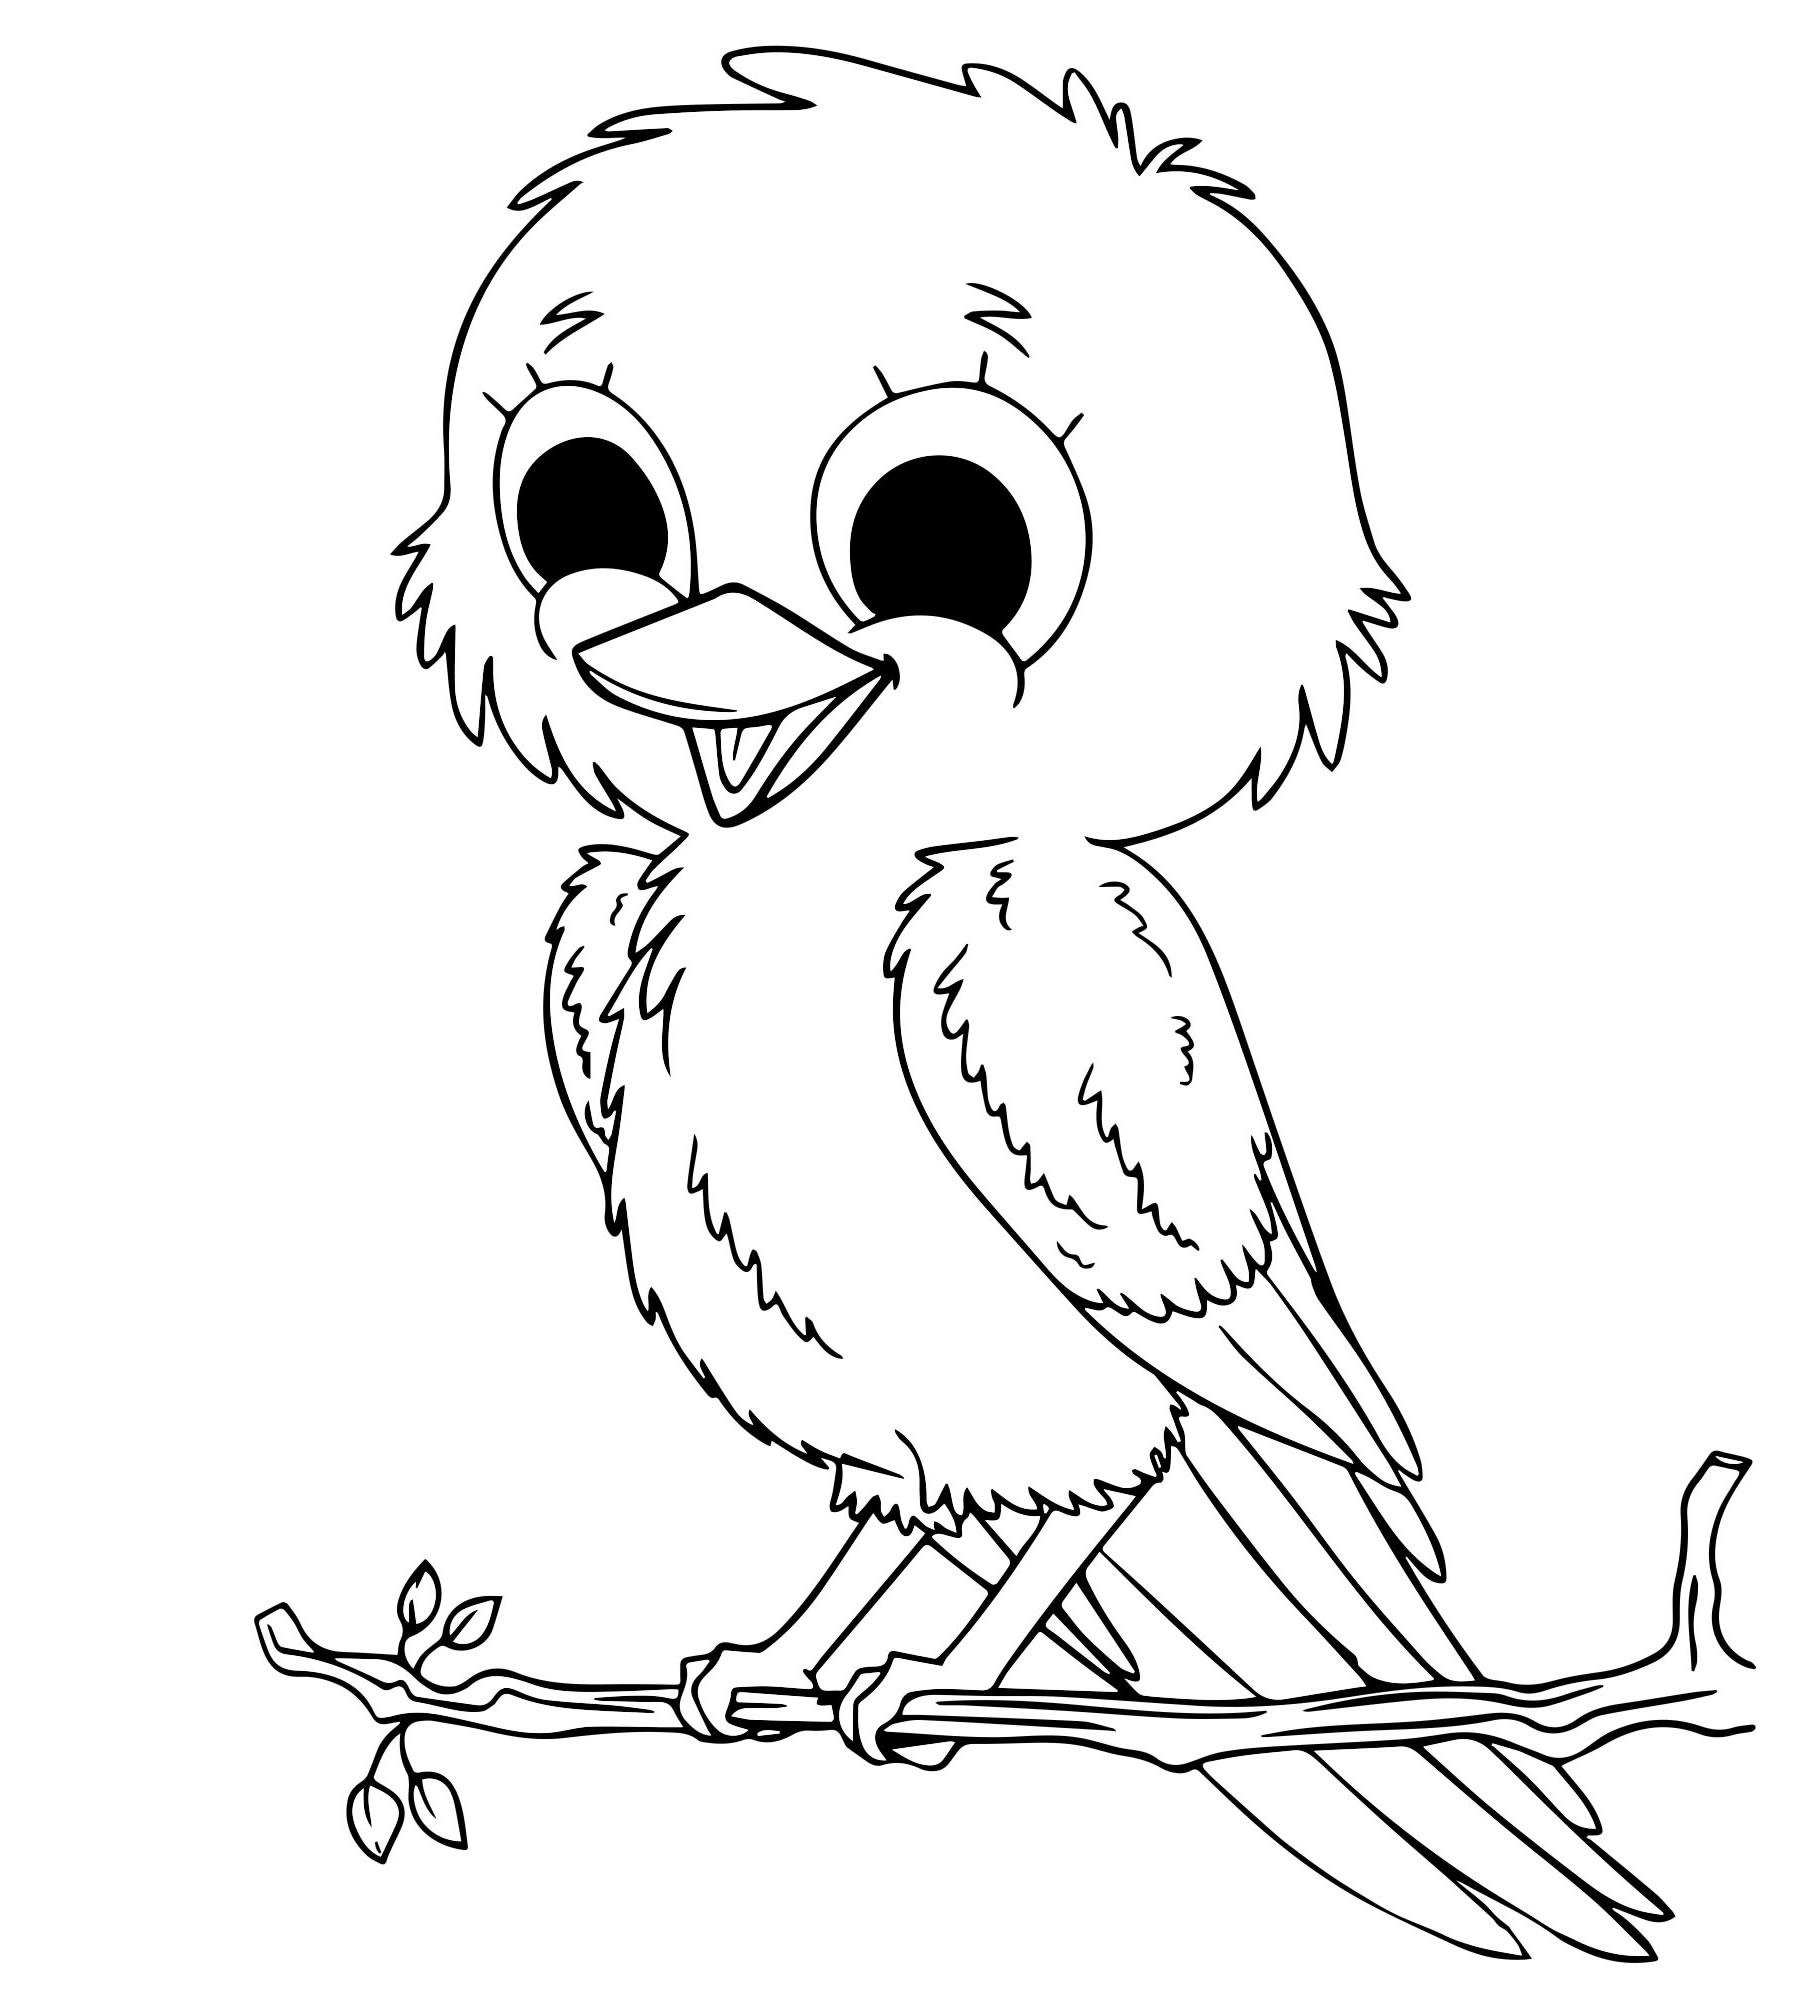 Coloring book dazzling bird for kids